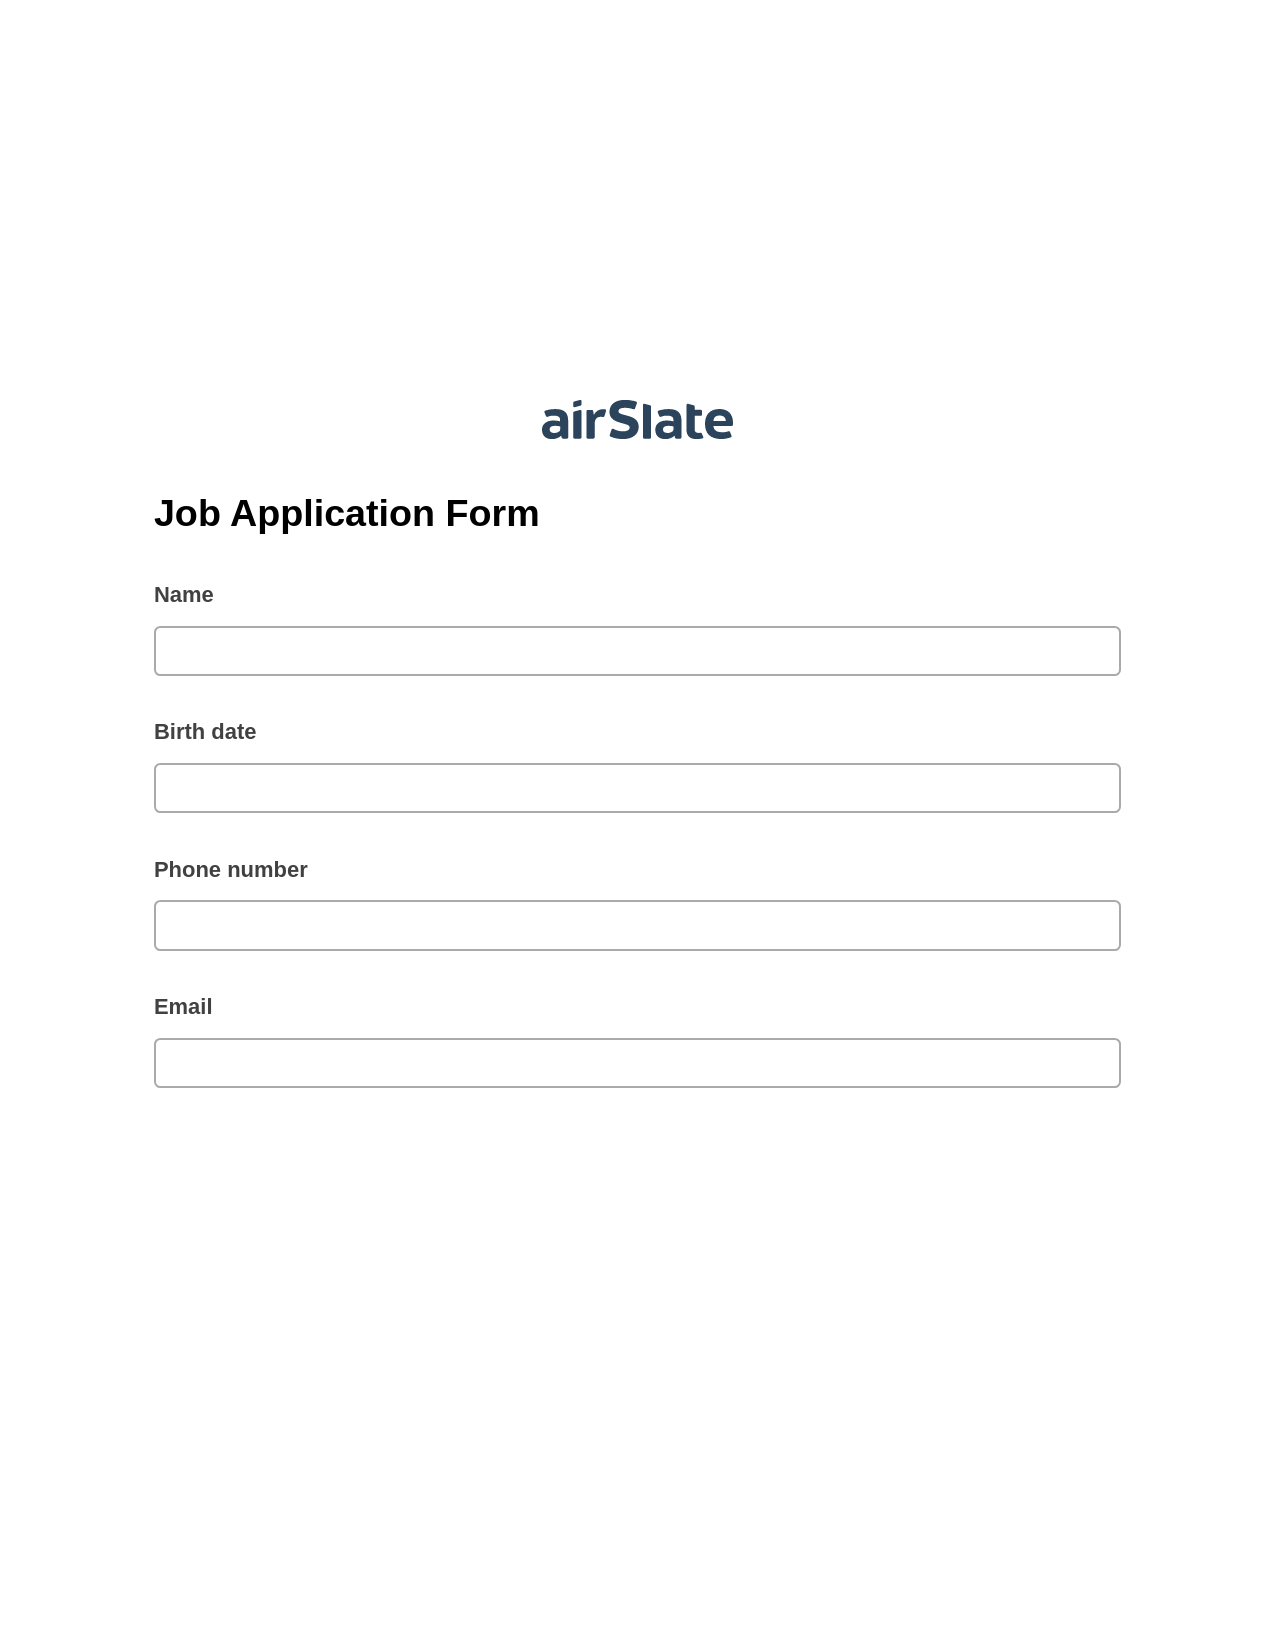 Multirole Job Application Form Pre-fill Slate from MS Dynamics 365 Records Bot, Export to MS Dynamics 365 Bot, Archive to SharePoint Folder Bot